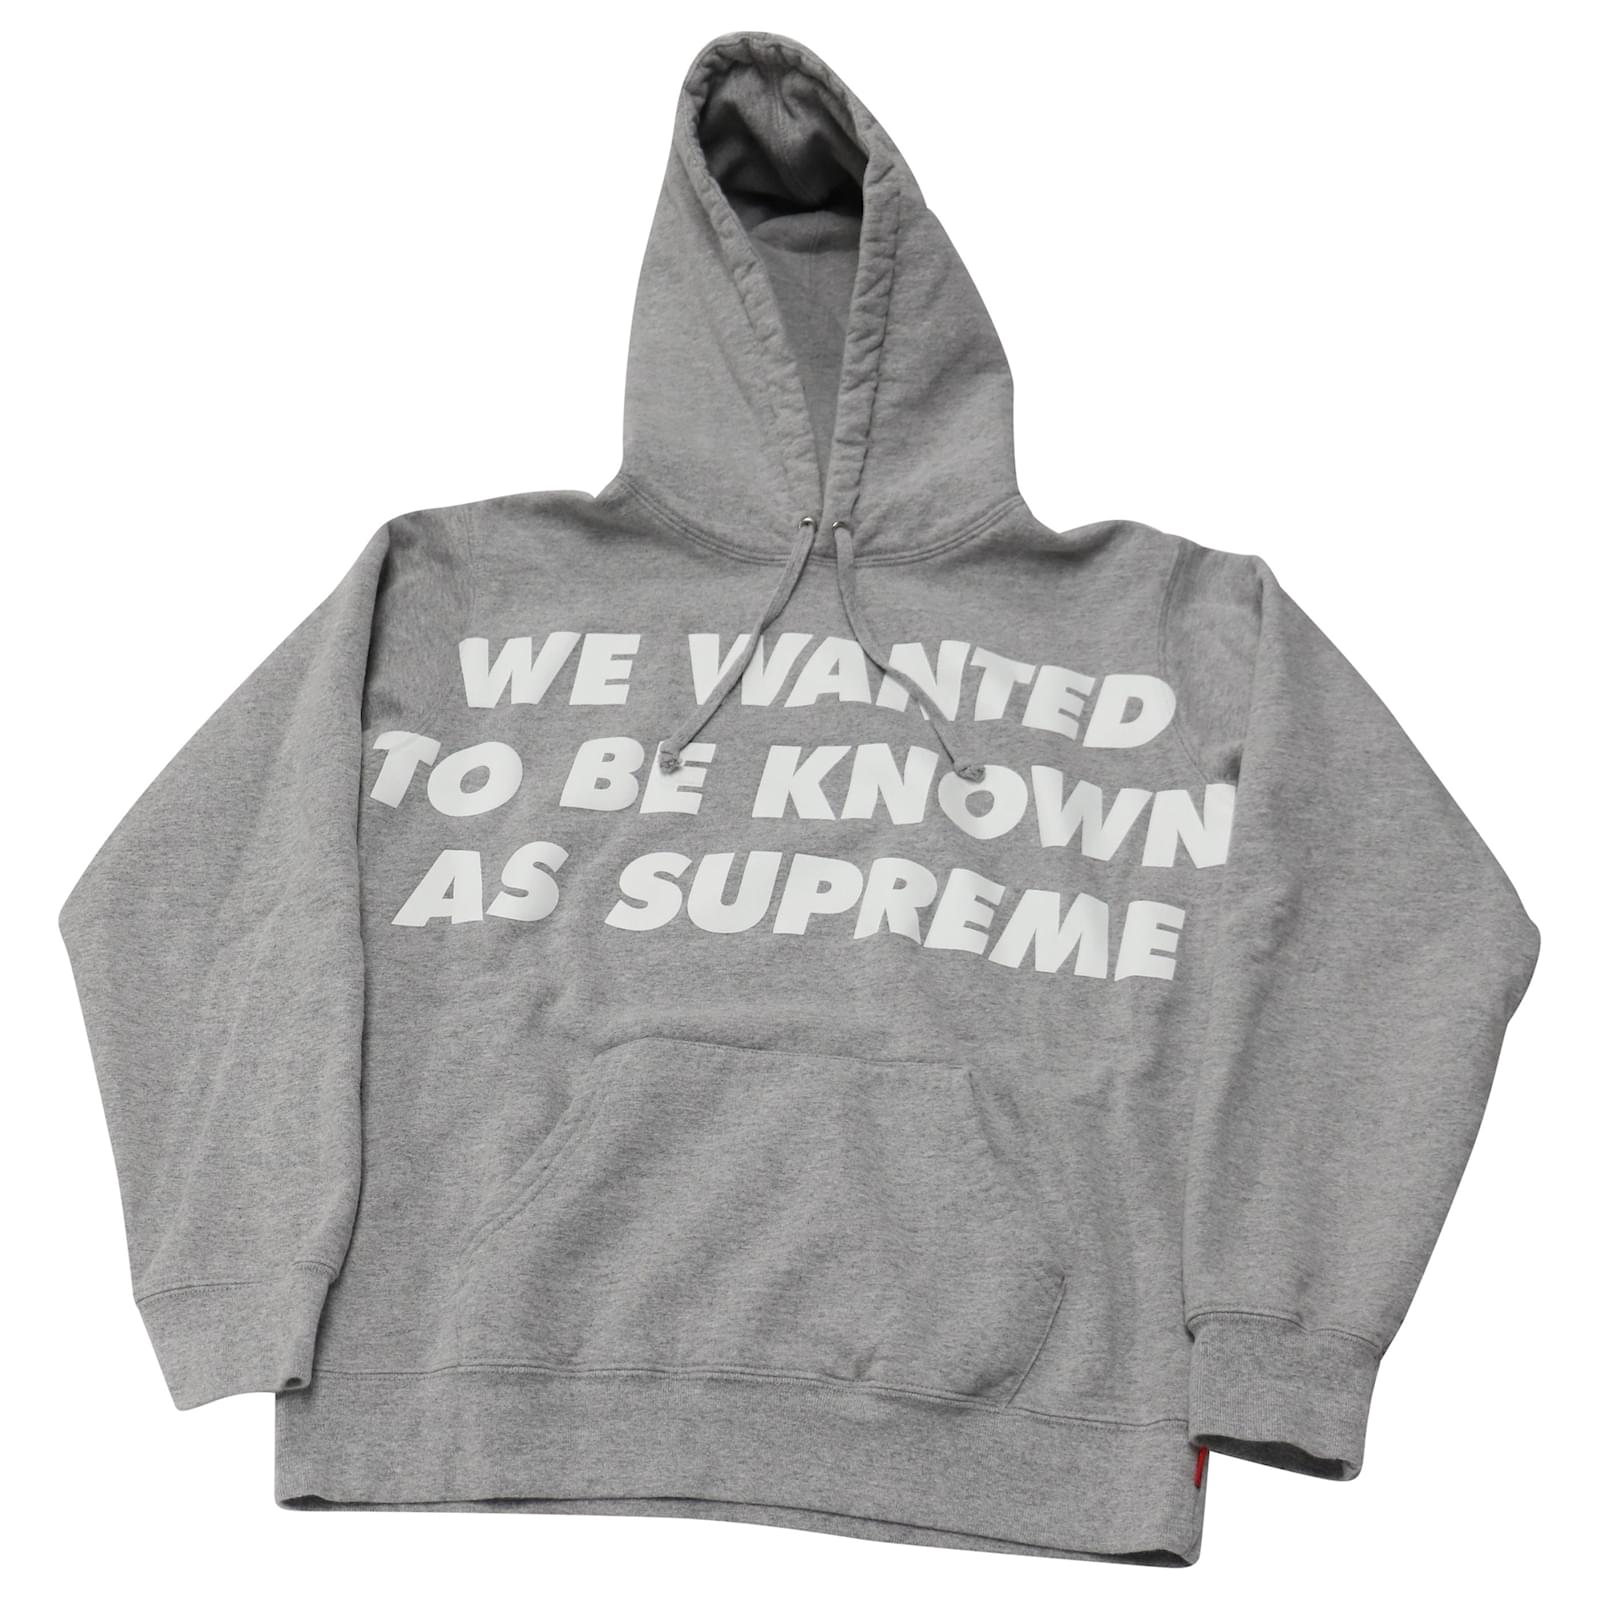 Sudadera con capucha Supreme "We Wanted To Be Known As Supreme" algodón gris ref.526332 -